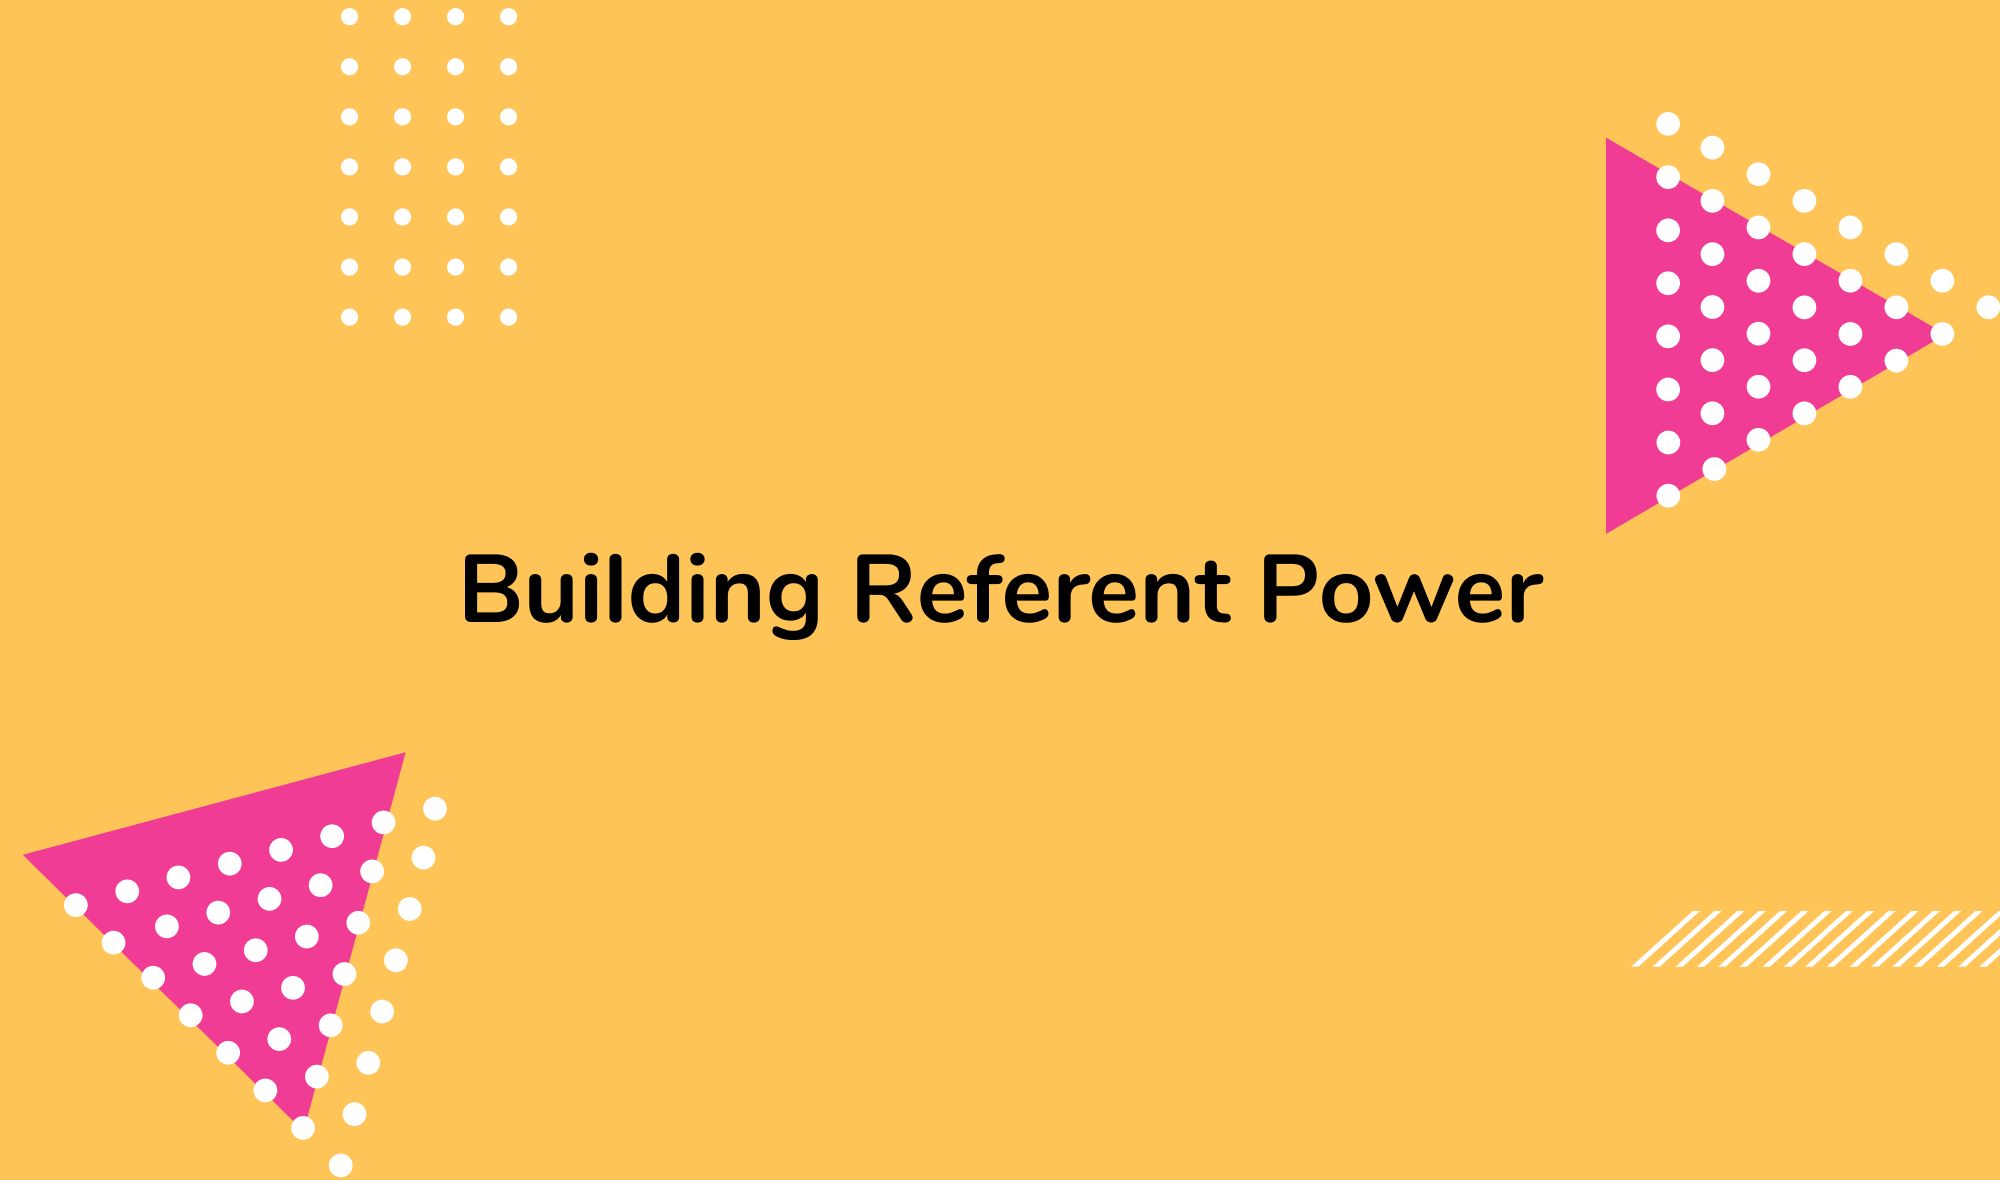 Building Referent Power: Trust and Collaboration